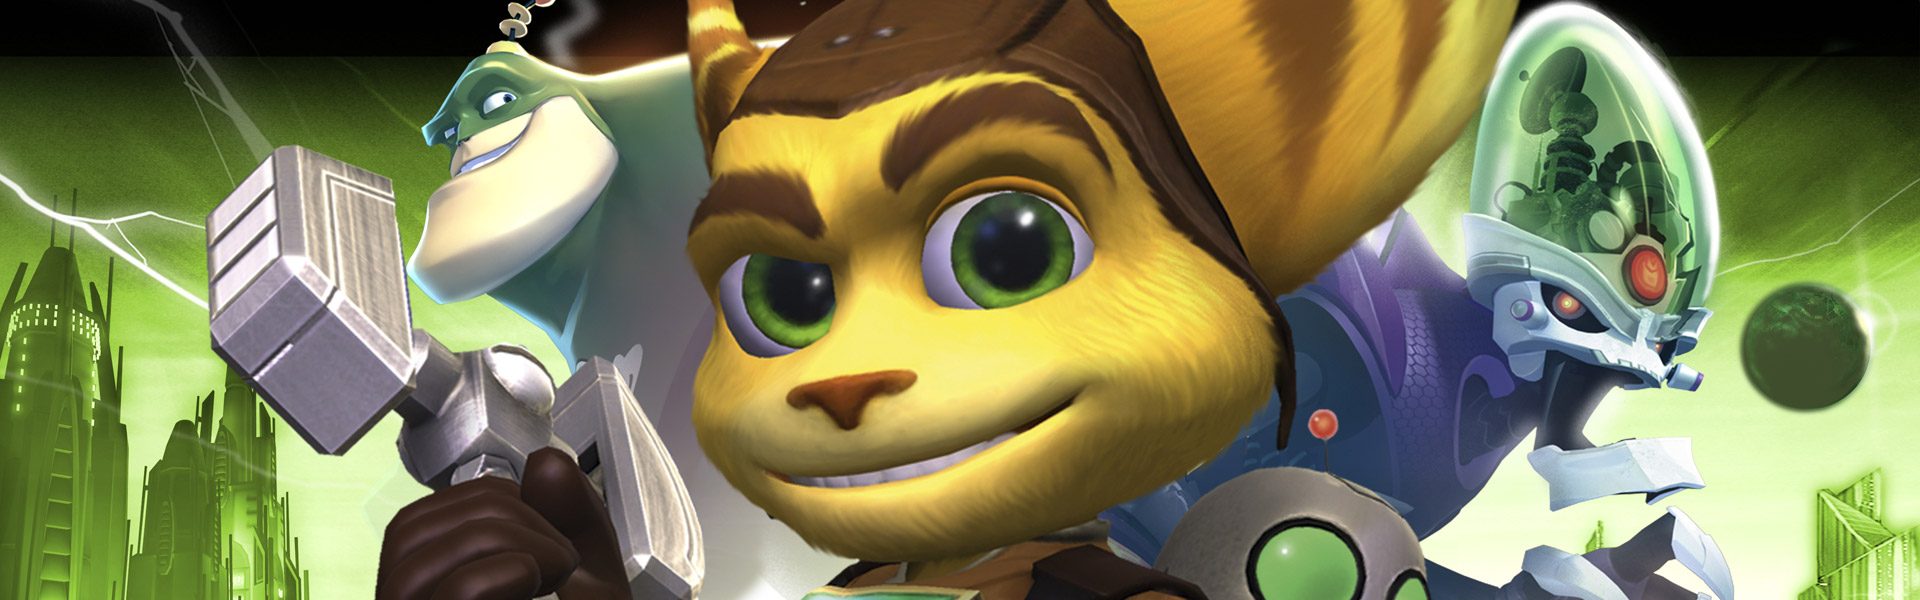 ratchet and clank trilogy ps3 amazon